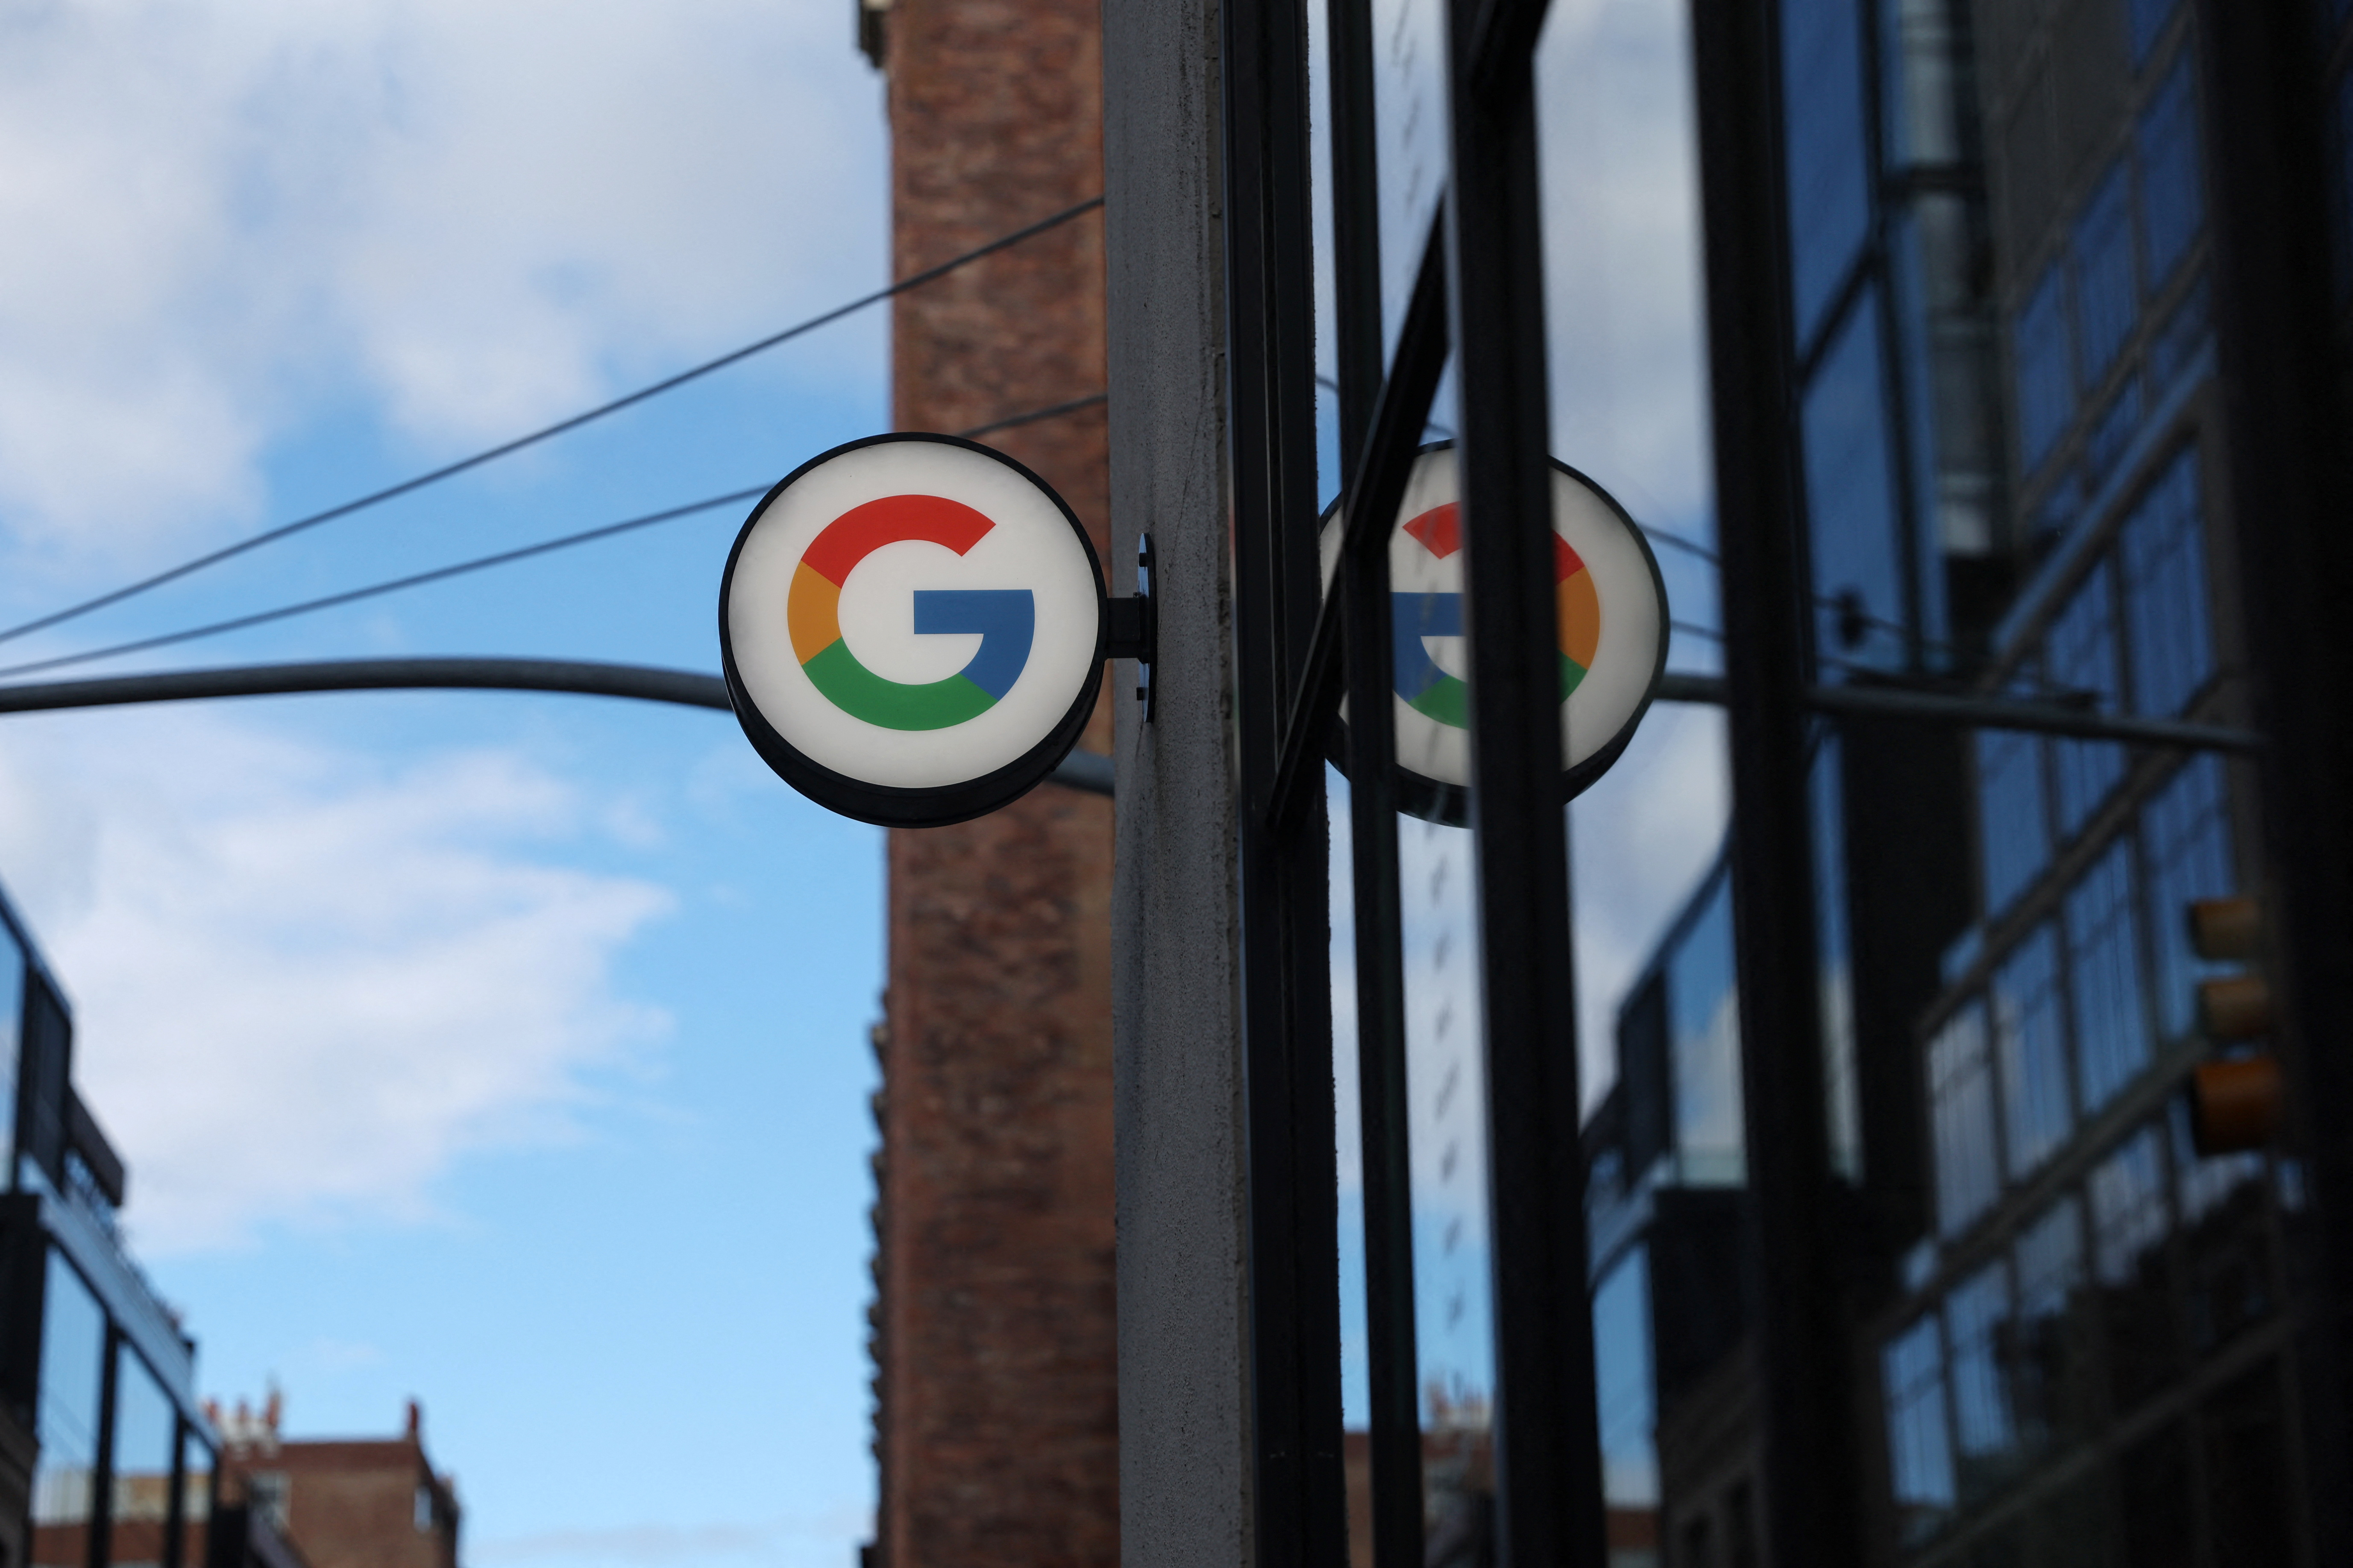 The Google LLC logo is visible at the Google Store Chelsea in New York City